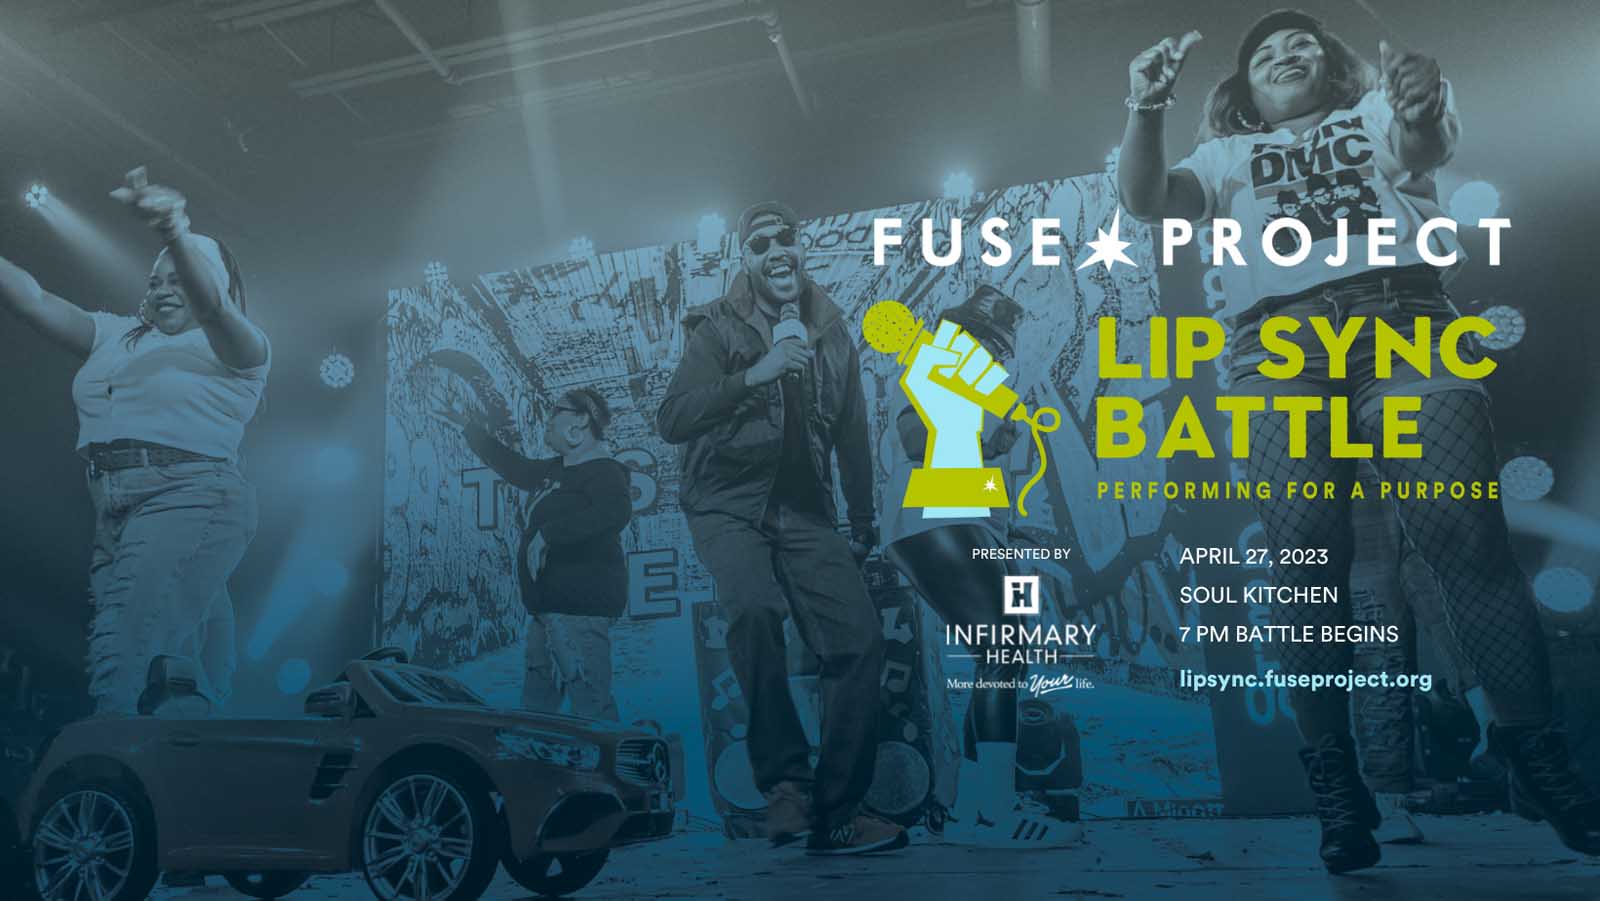 Fuse Project Fundraiser Announced